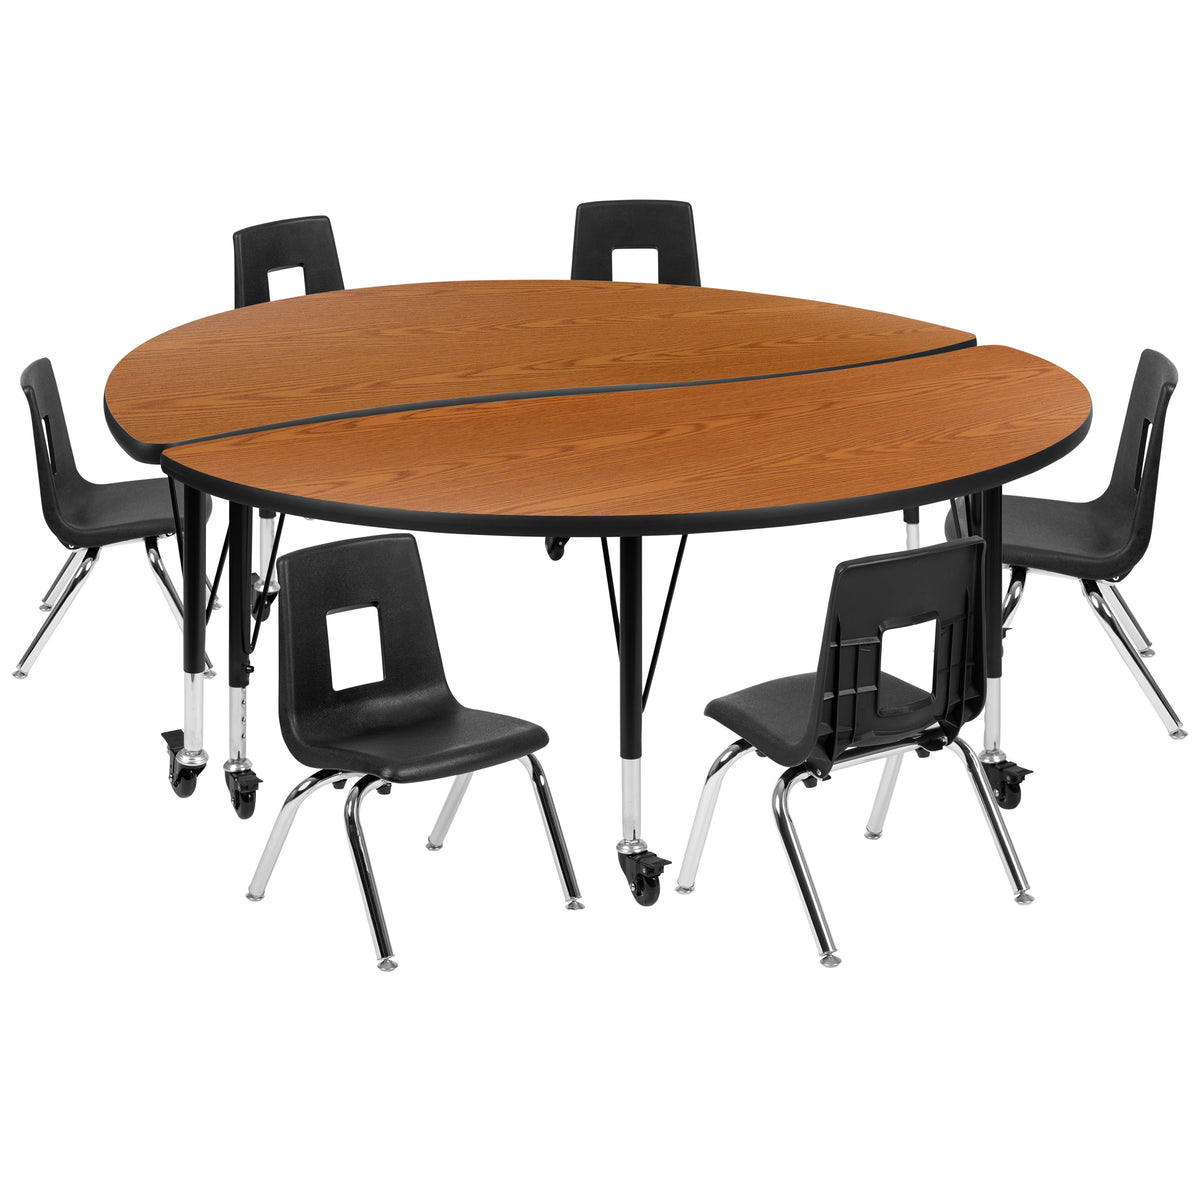 Oak |#| Mobile 60inch Circle Wave Activity Table Set-12inch Student Stack Chairs, Oak/Black